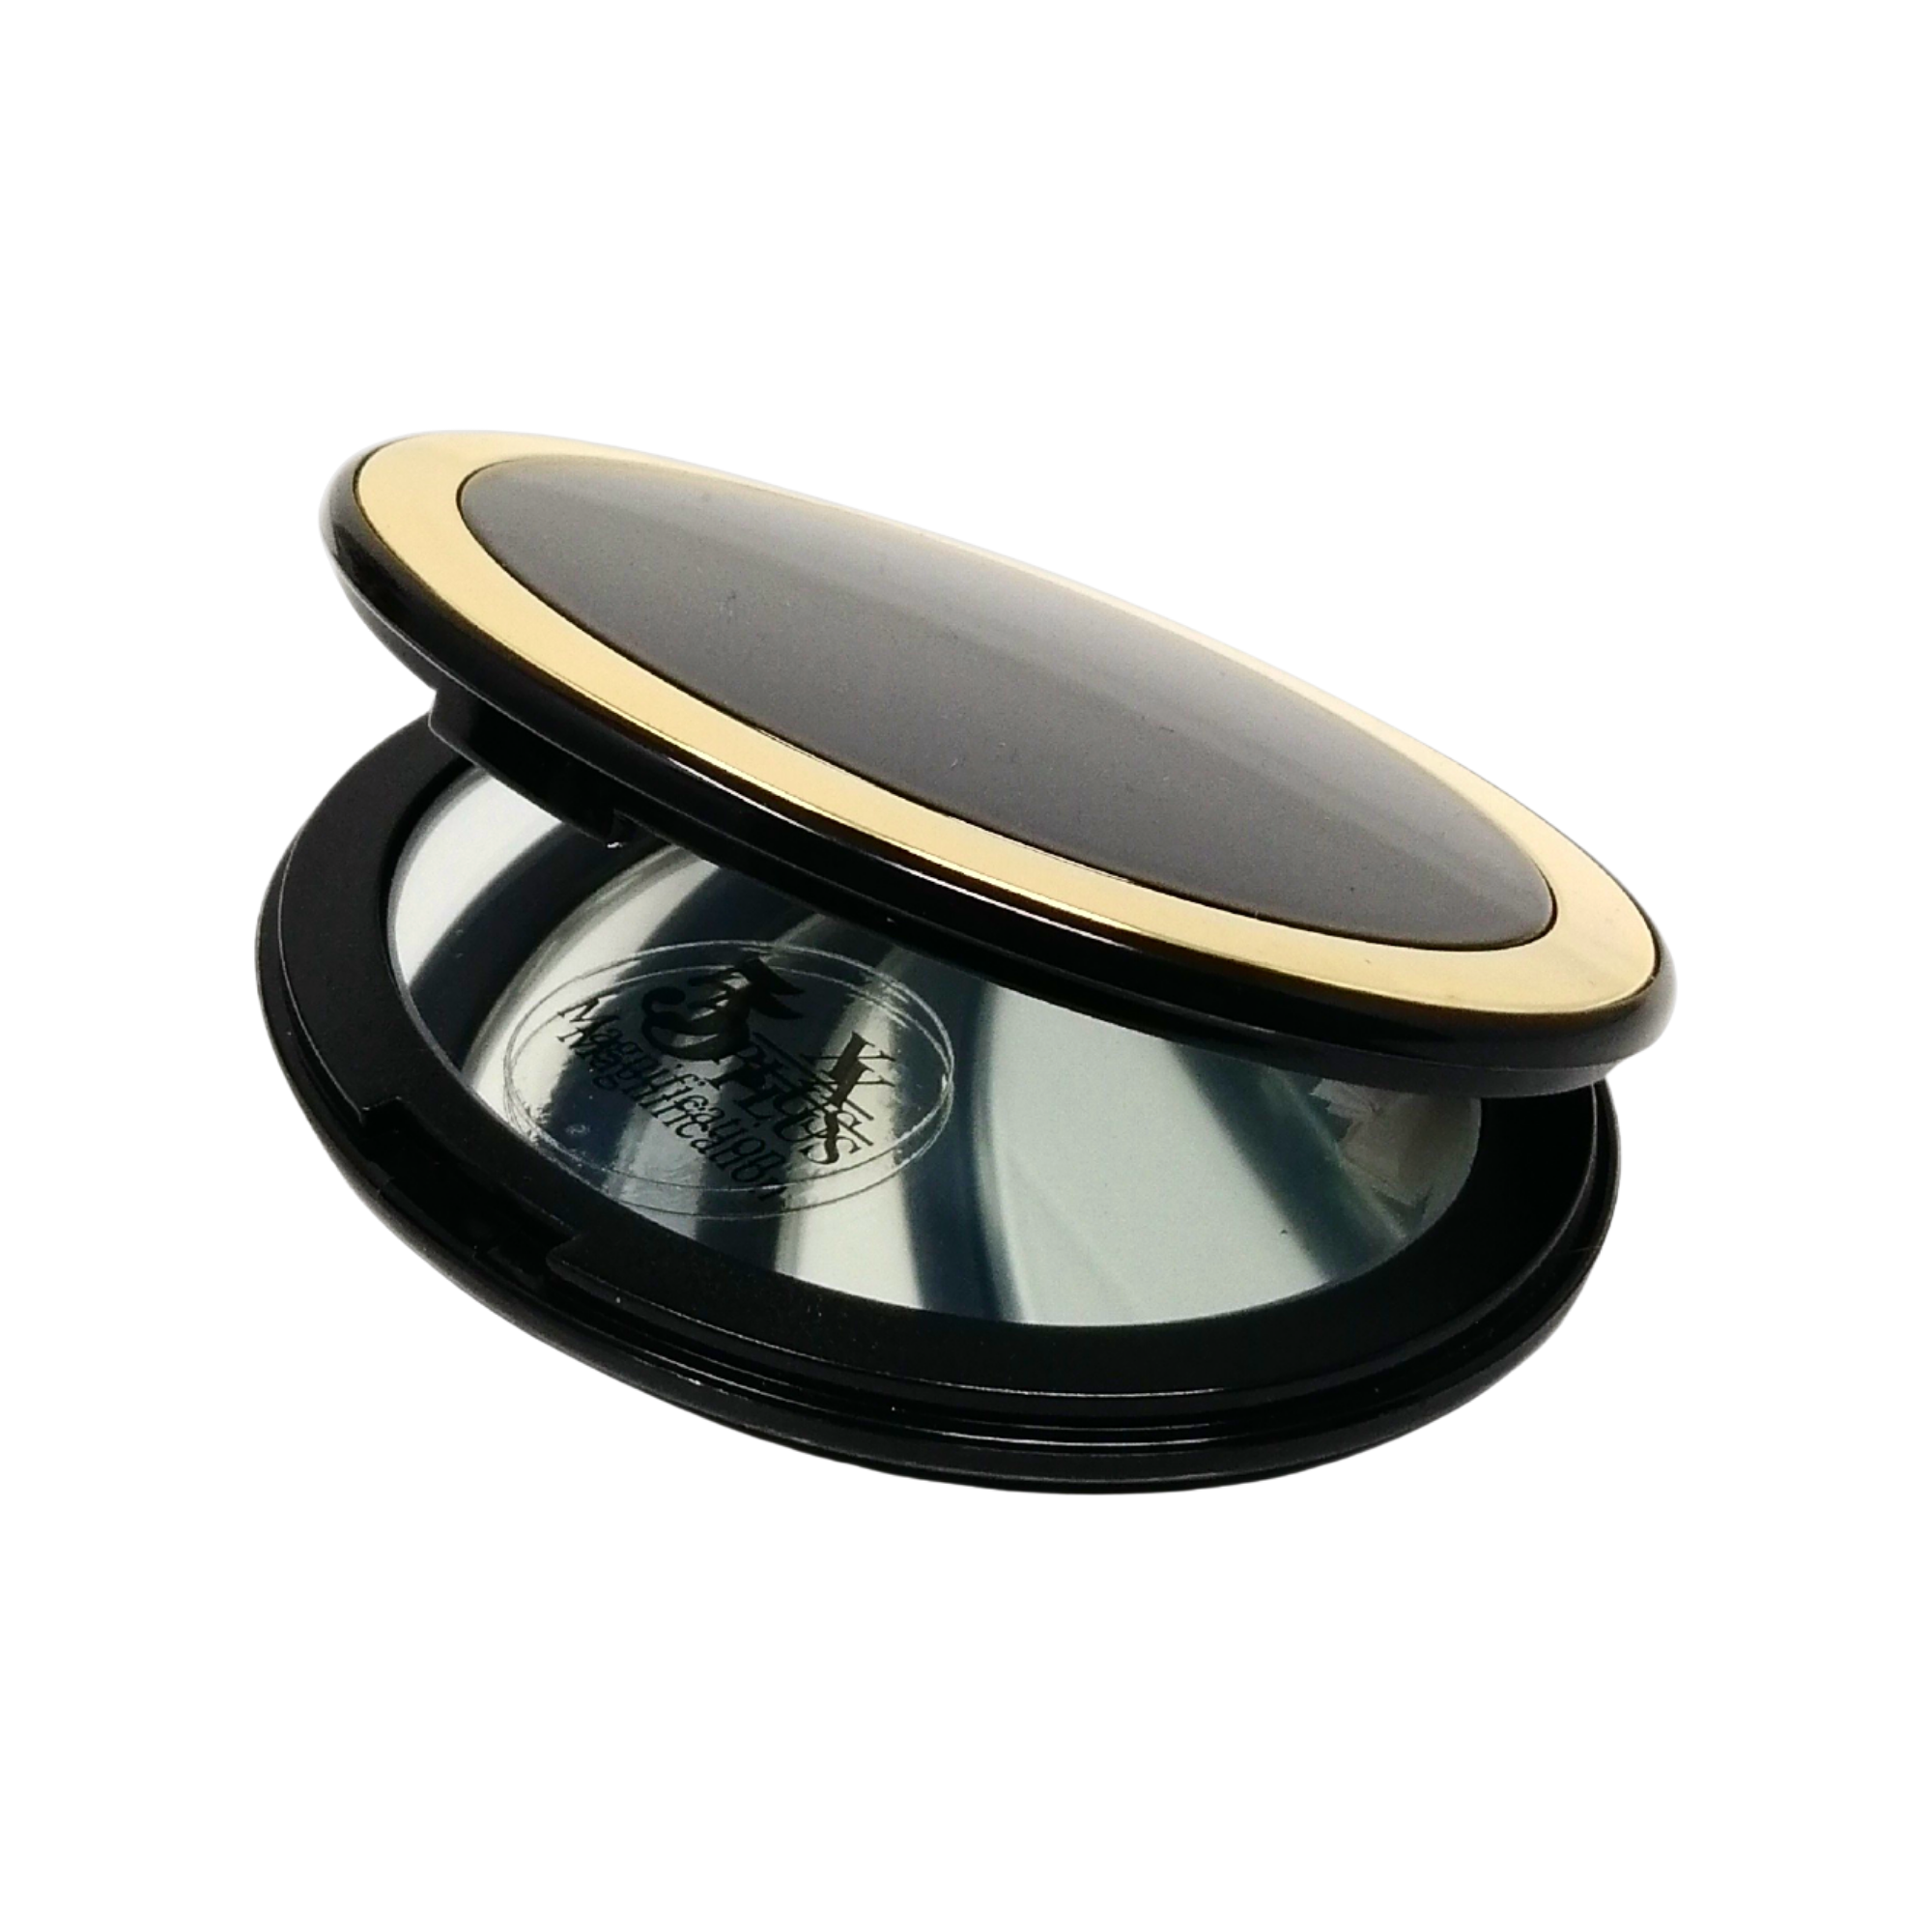 1X/5X Magnifying Double-Sided Oval Compact Mirror (CM405)